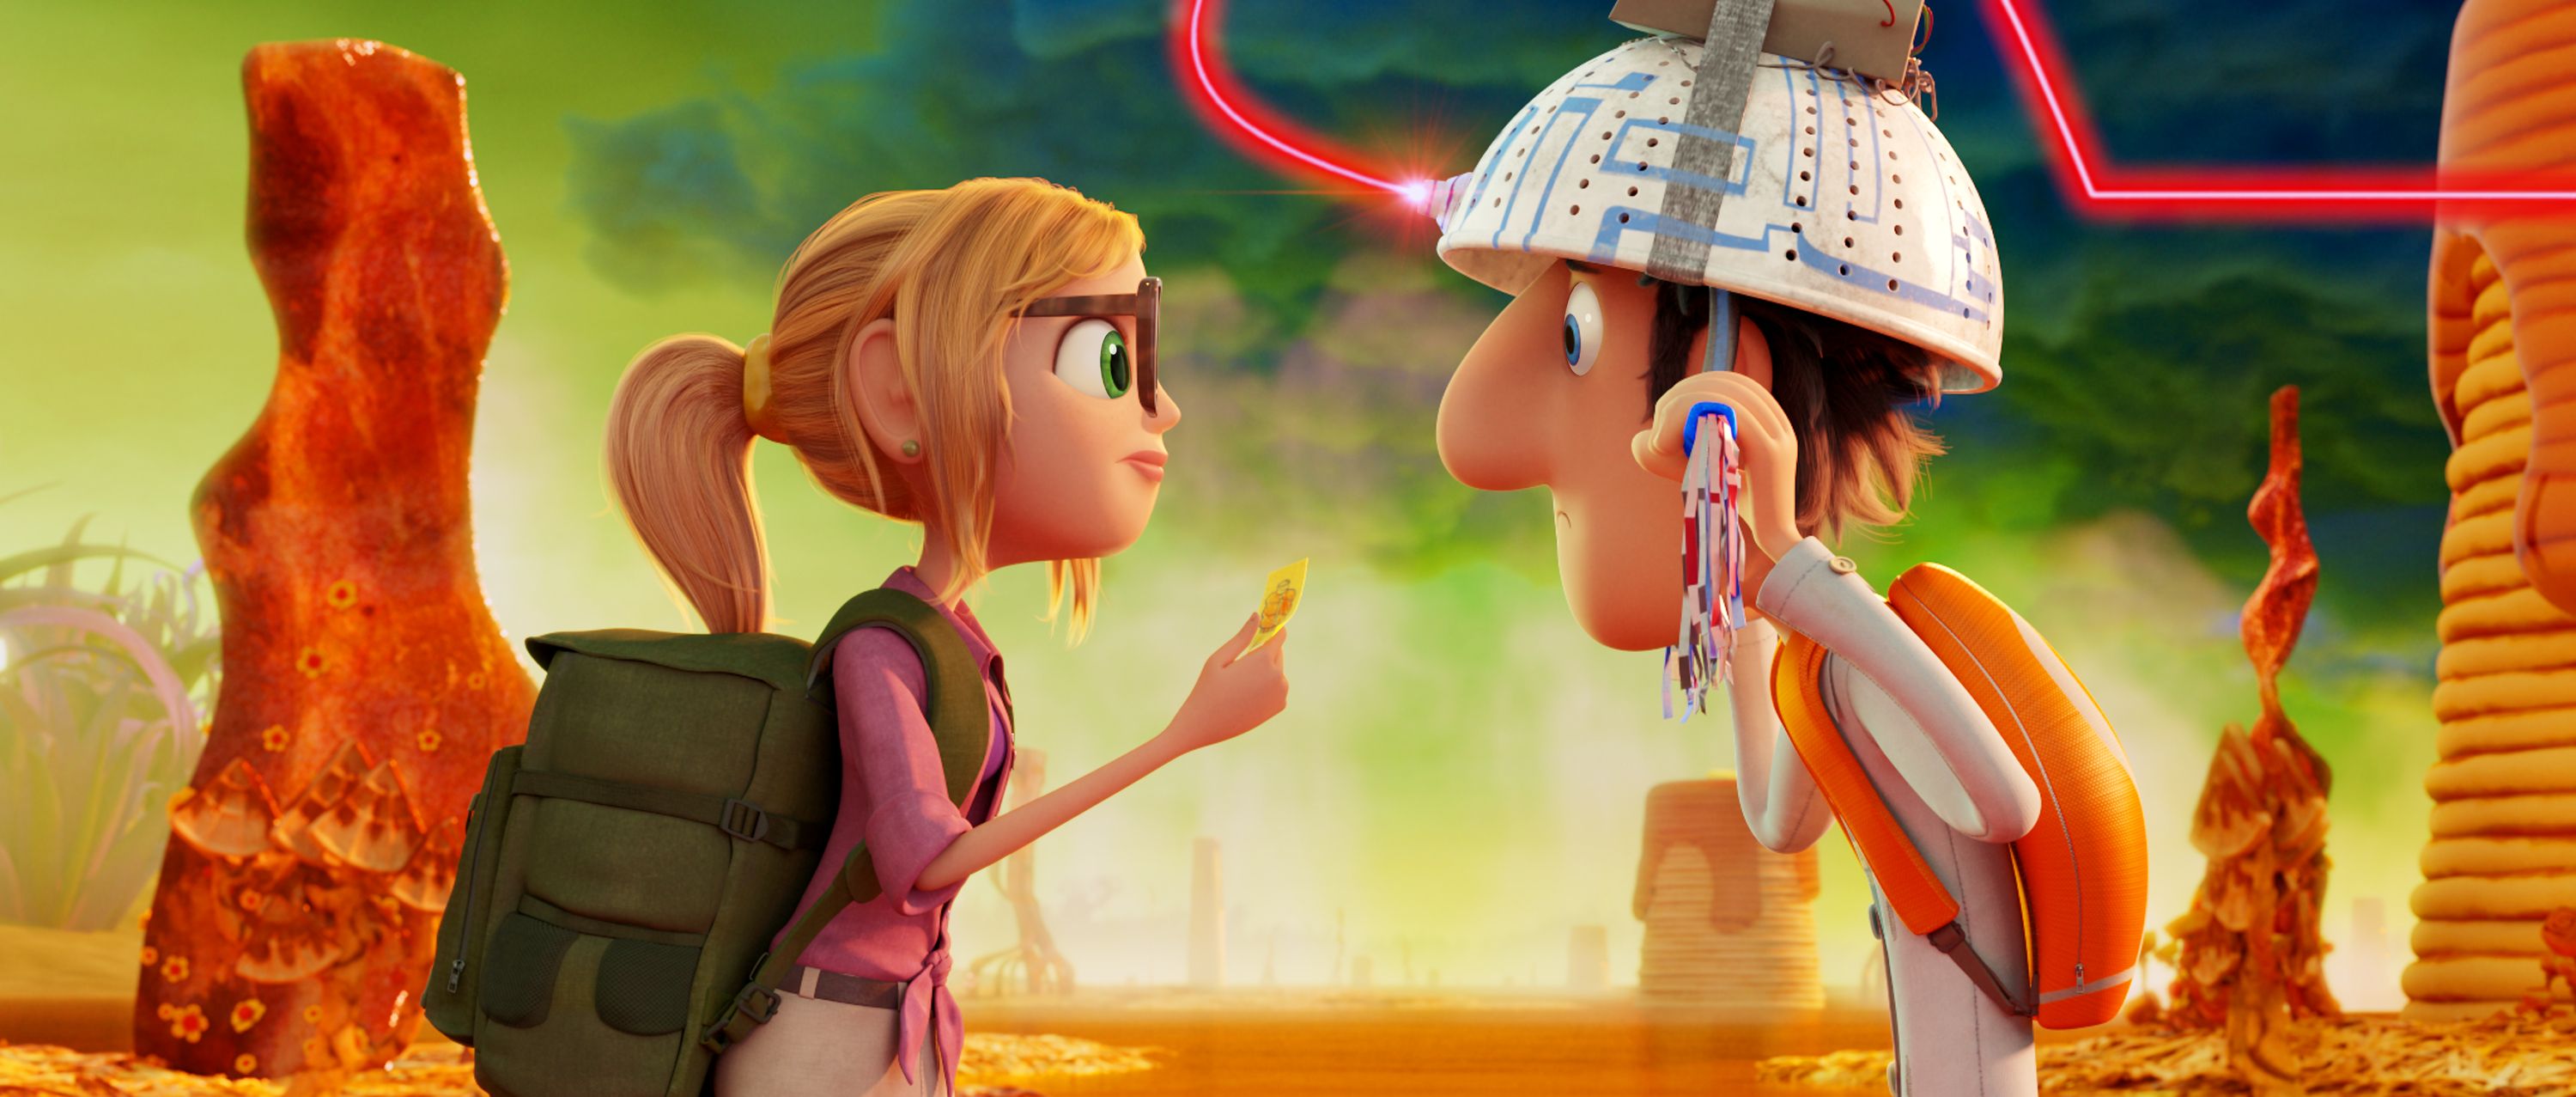 Cloudy with a Chance of Meatballs 2 Photo 9